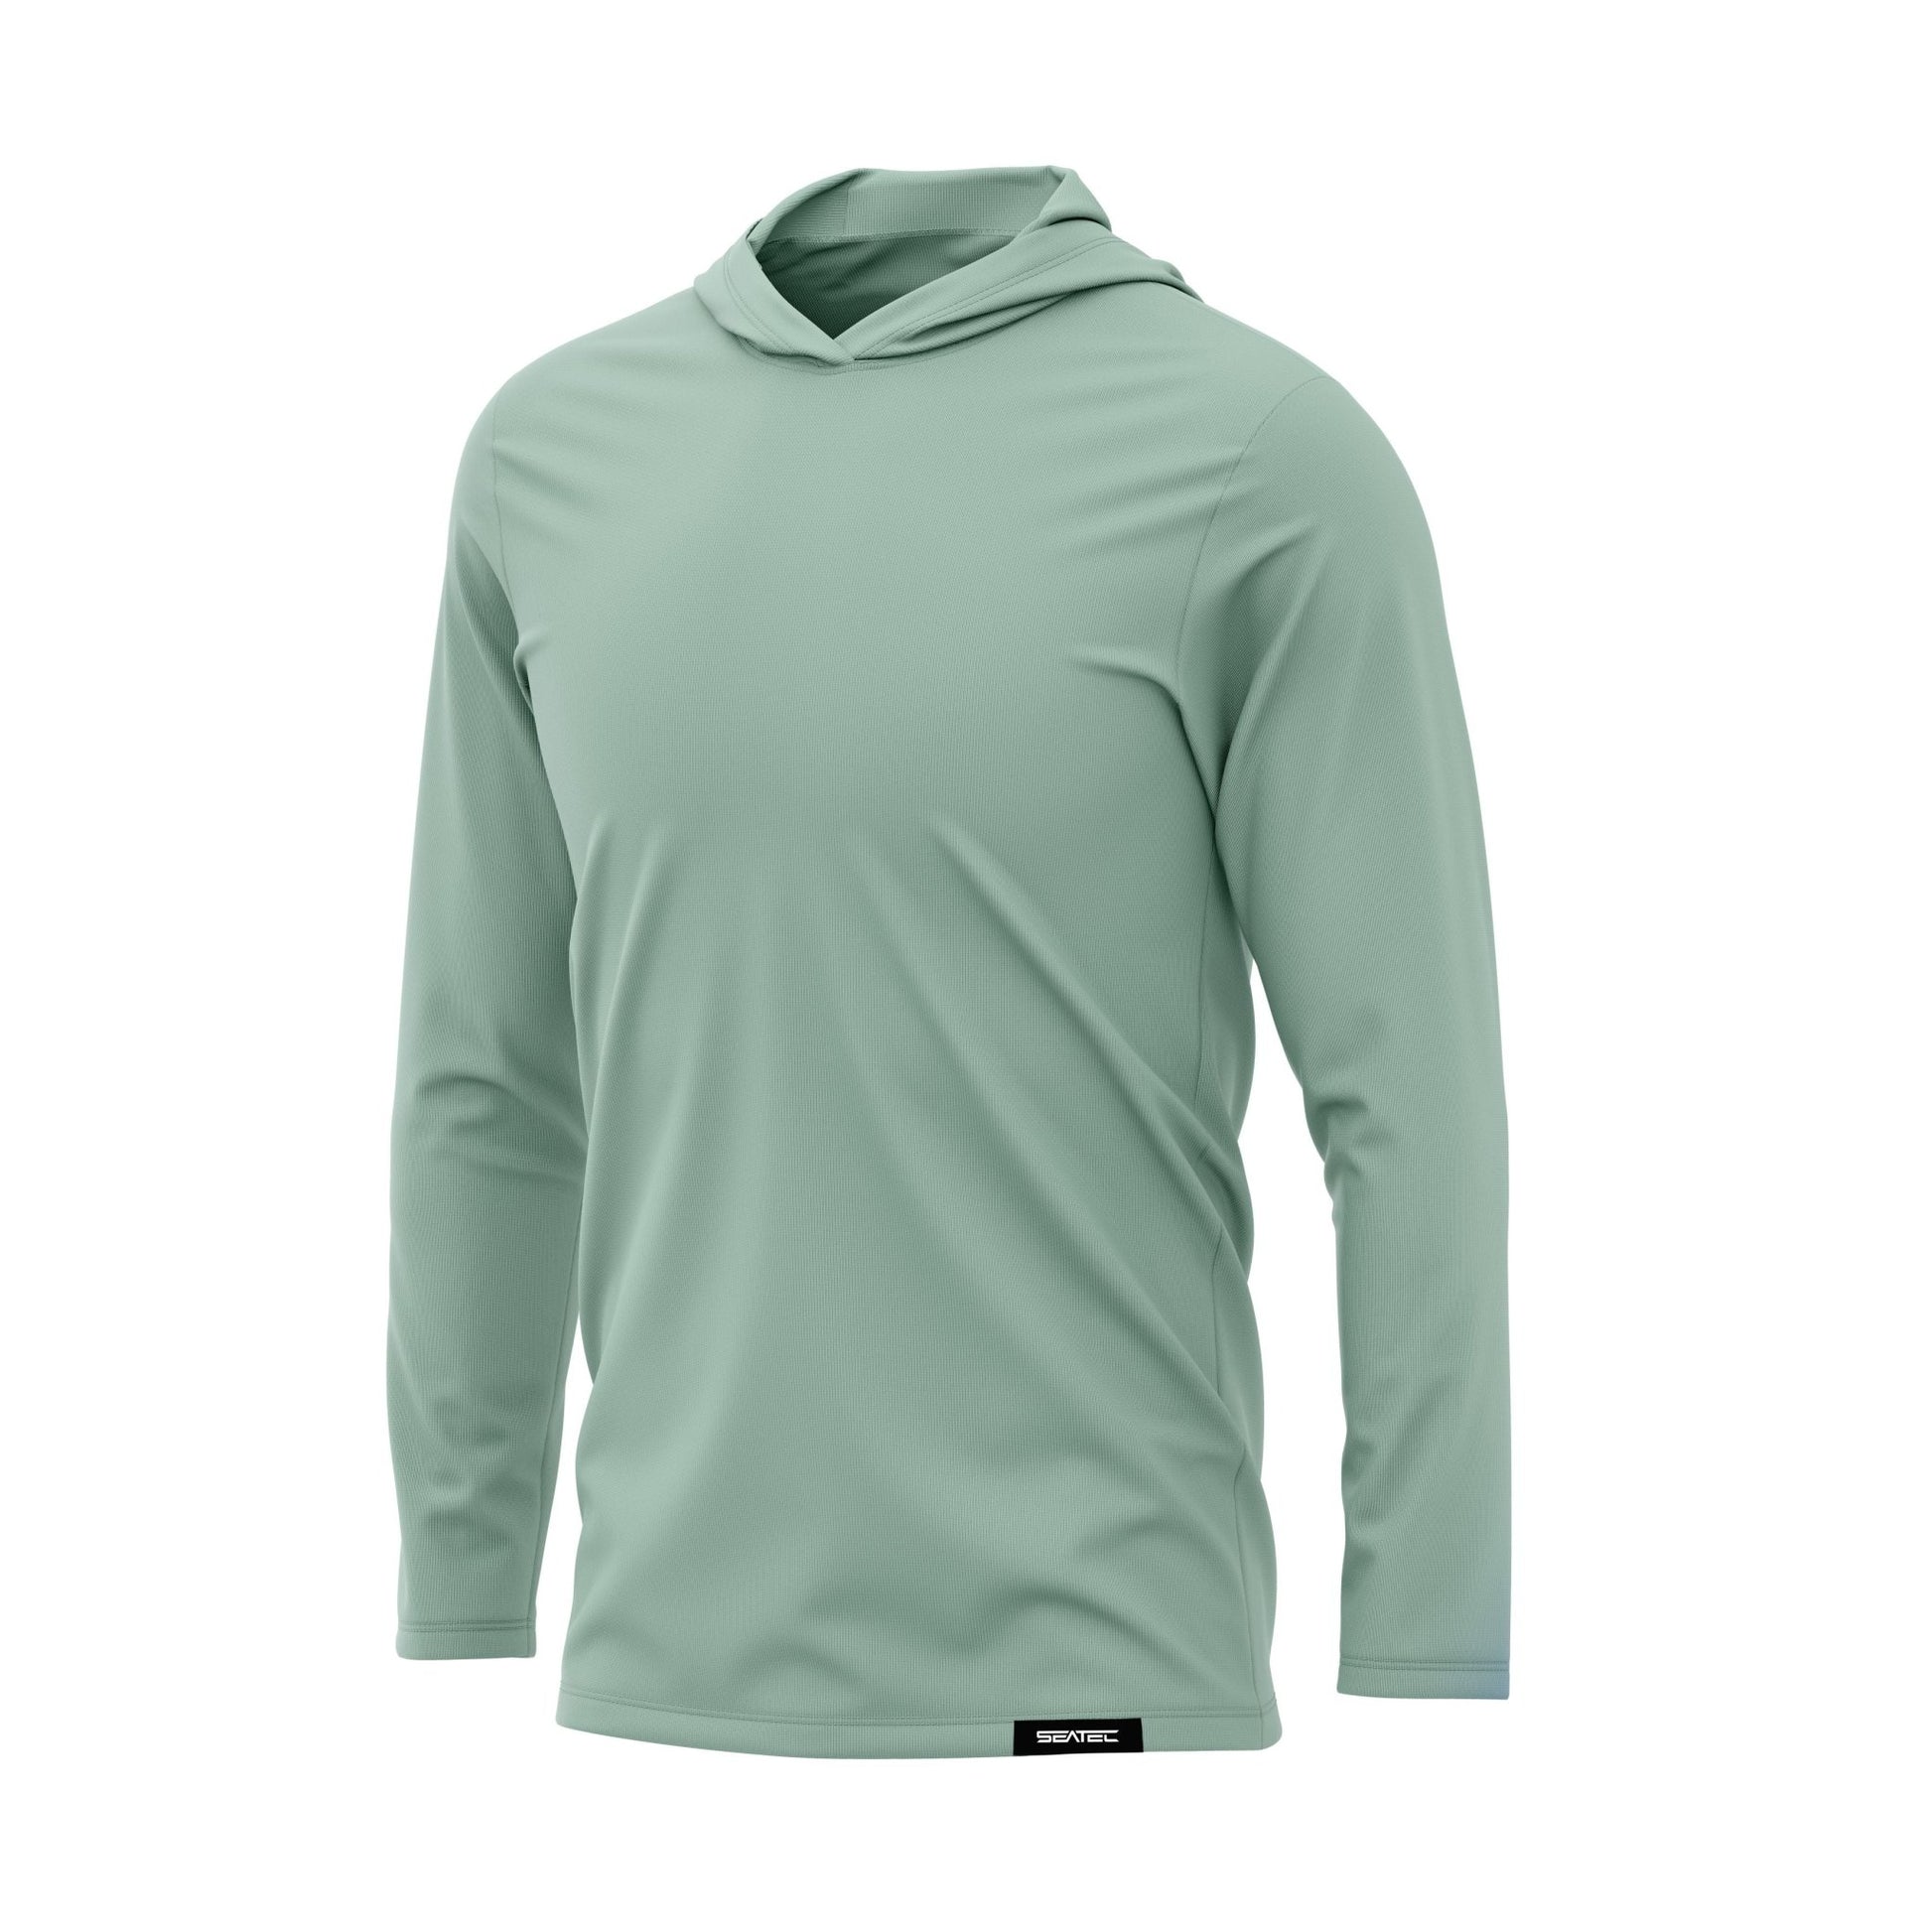 Seatec Outfitters | MEN'S ACTIVE | SEAFOAM | LS HOODED - Angler's Pro Tackle & Outdoors